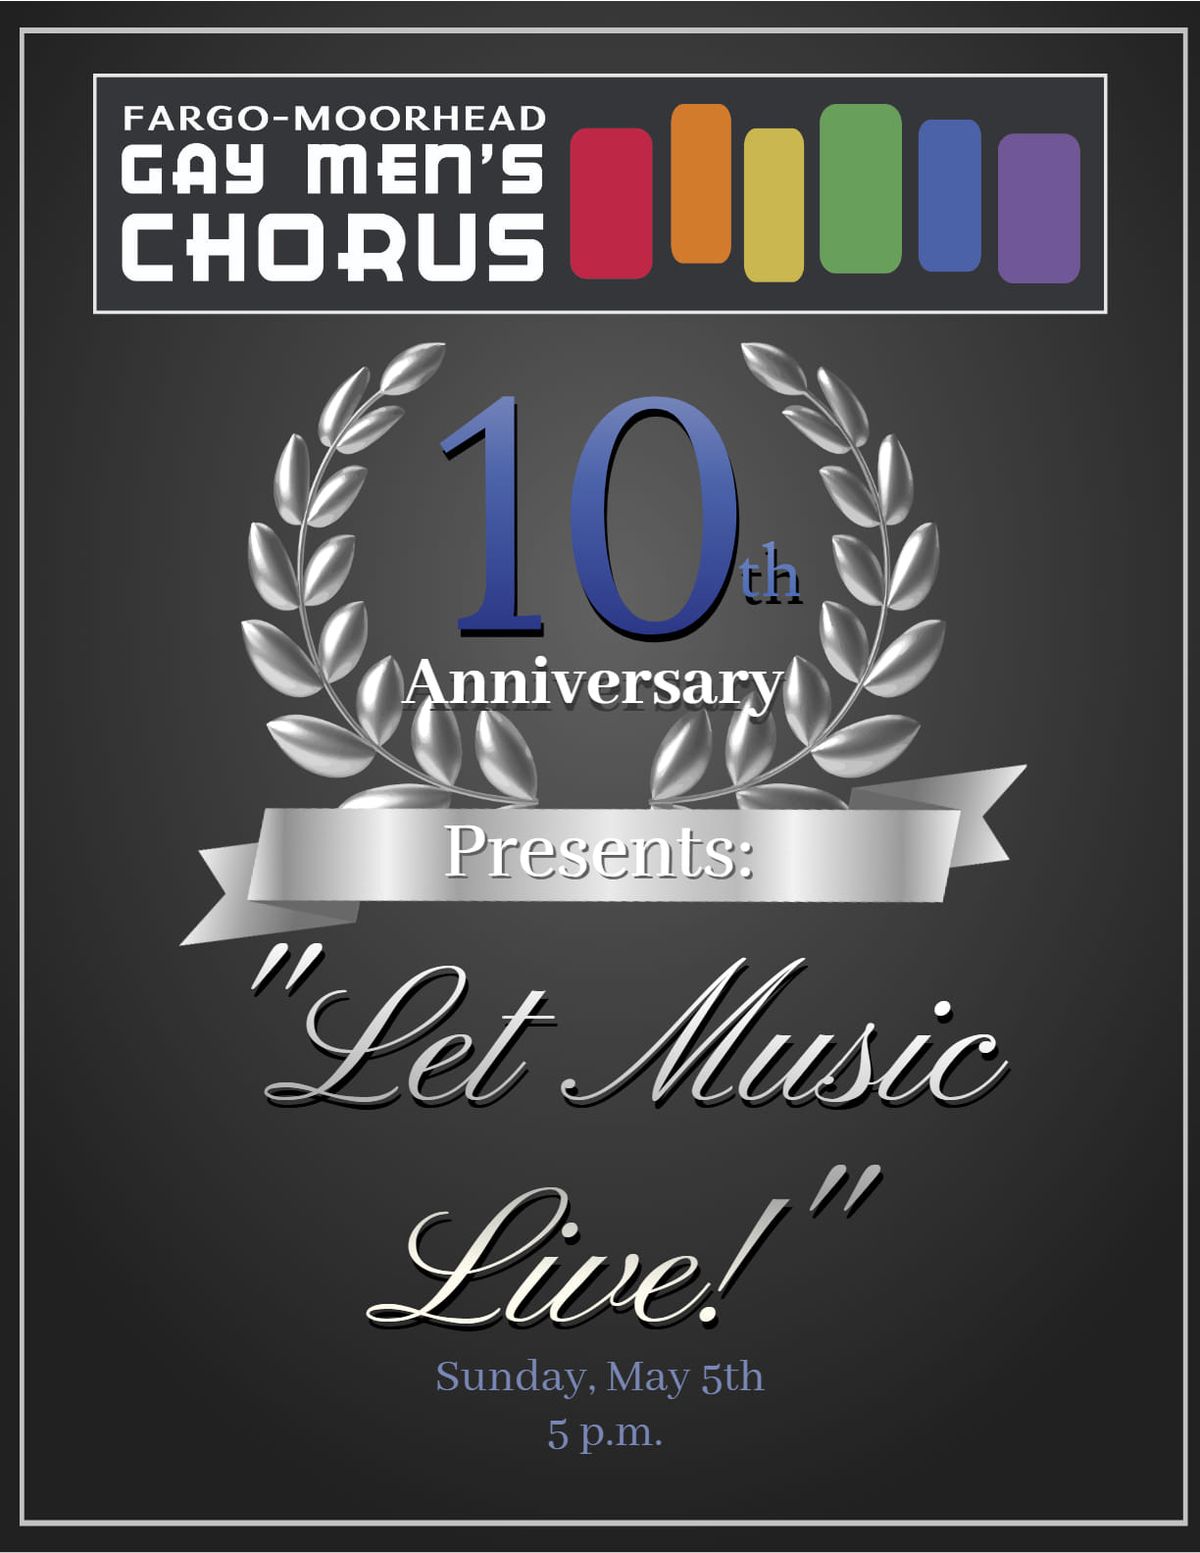 FMGMC 10th Anniversary Presents "Let Music Live!" 